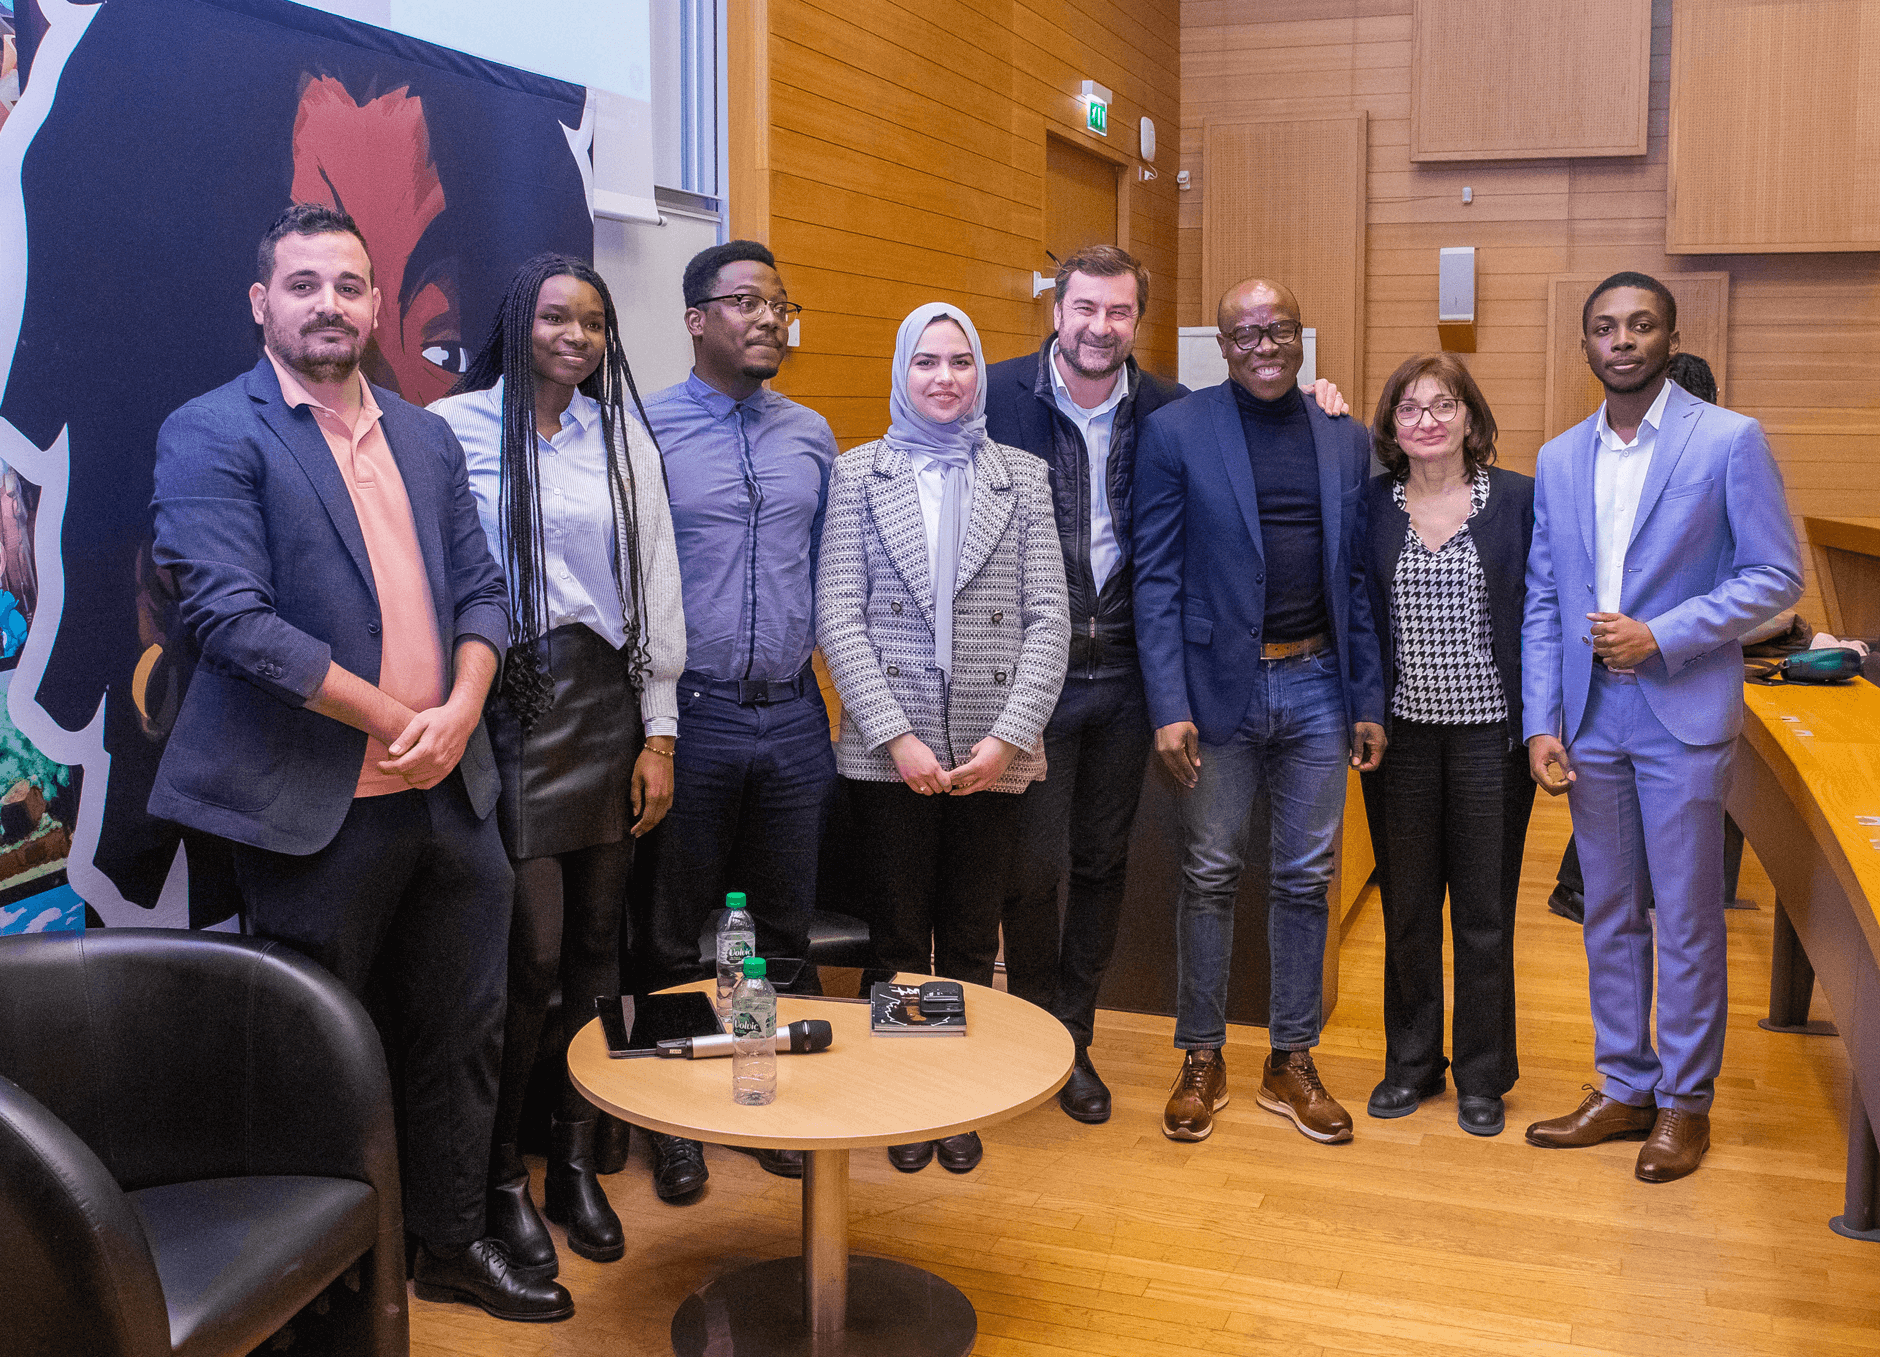 Panelists and student organizers © Tidiane Traore for the Magic System Foundation 